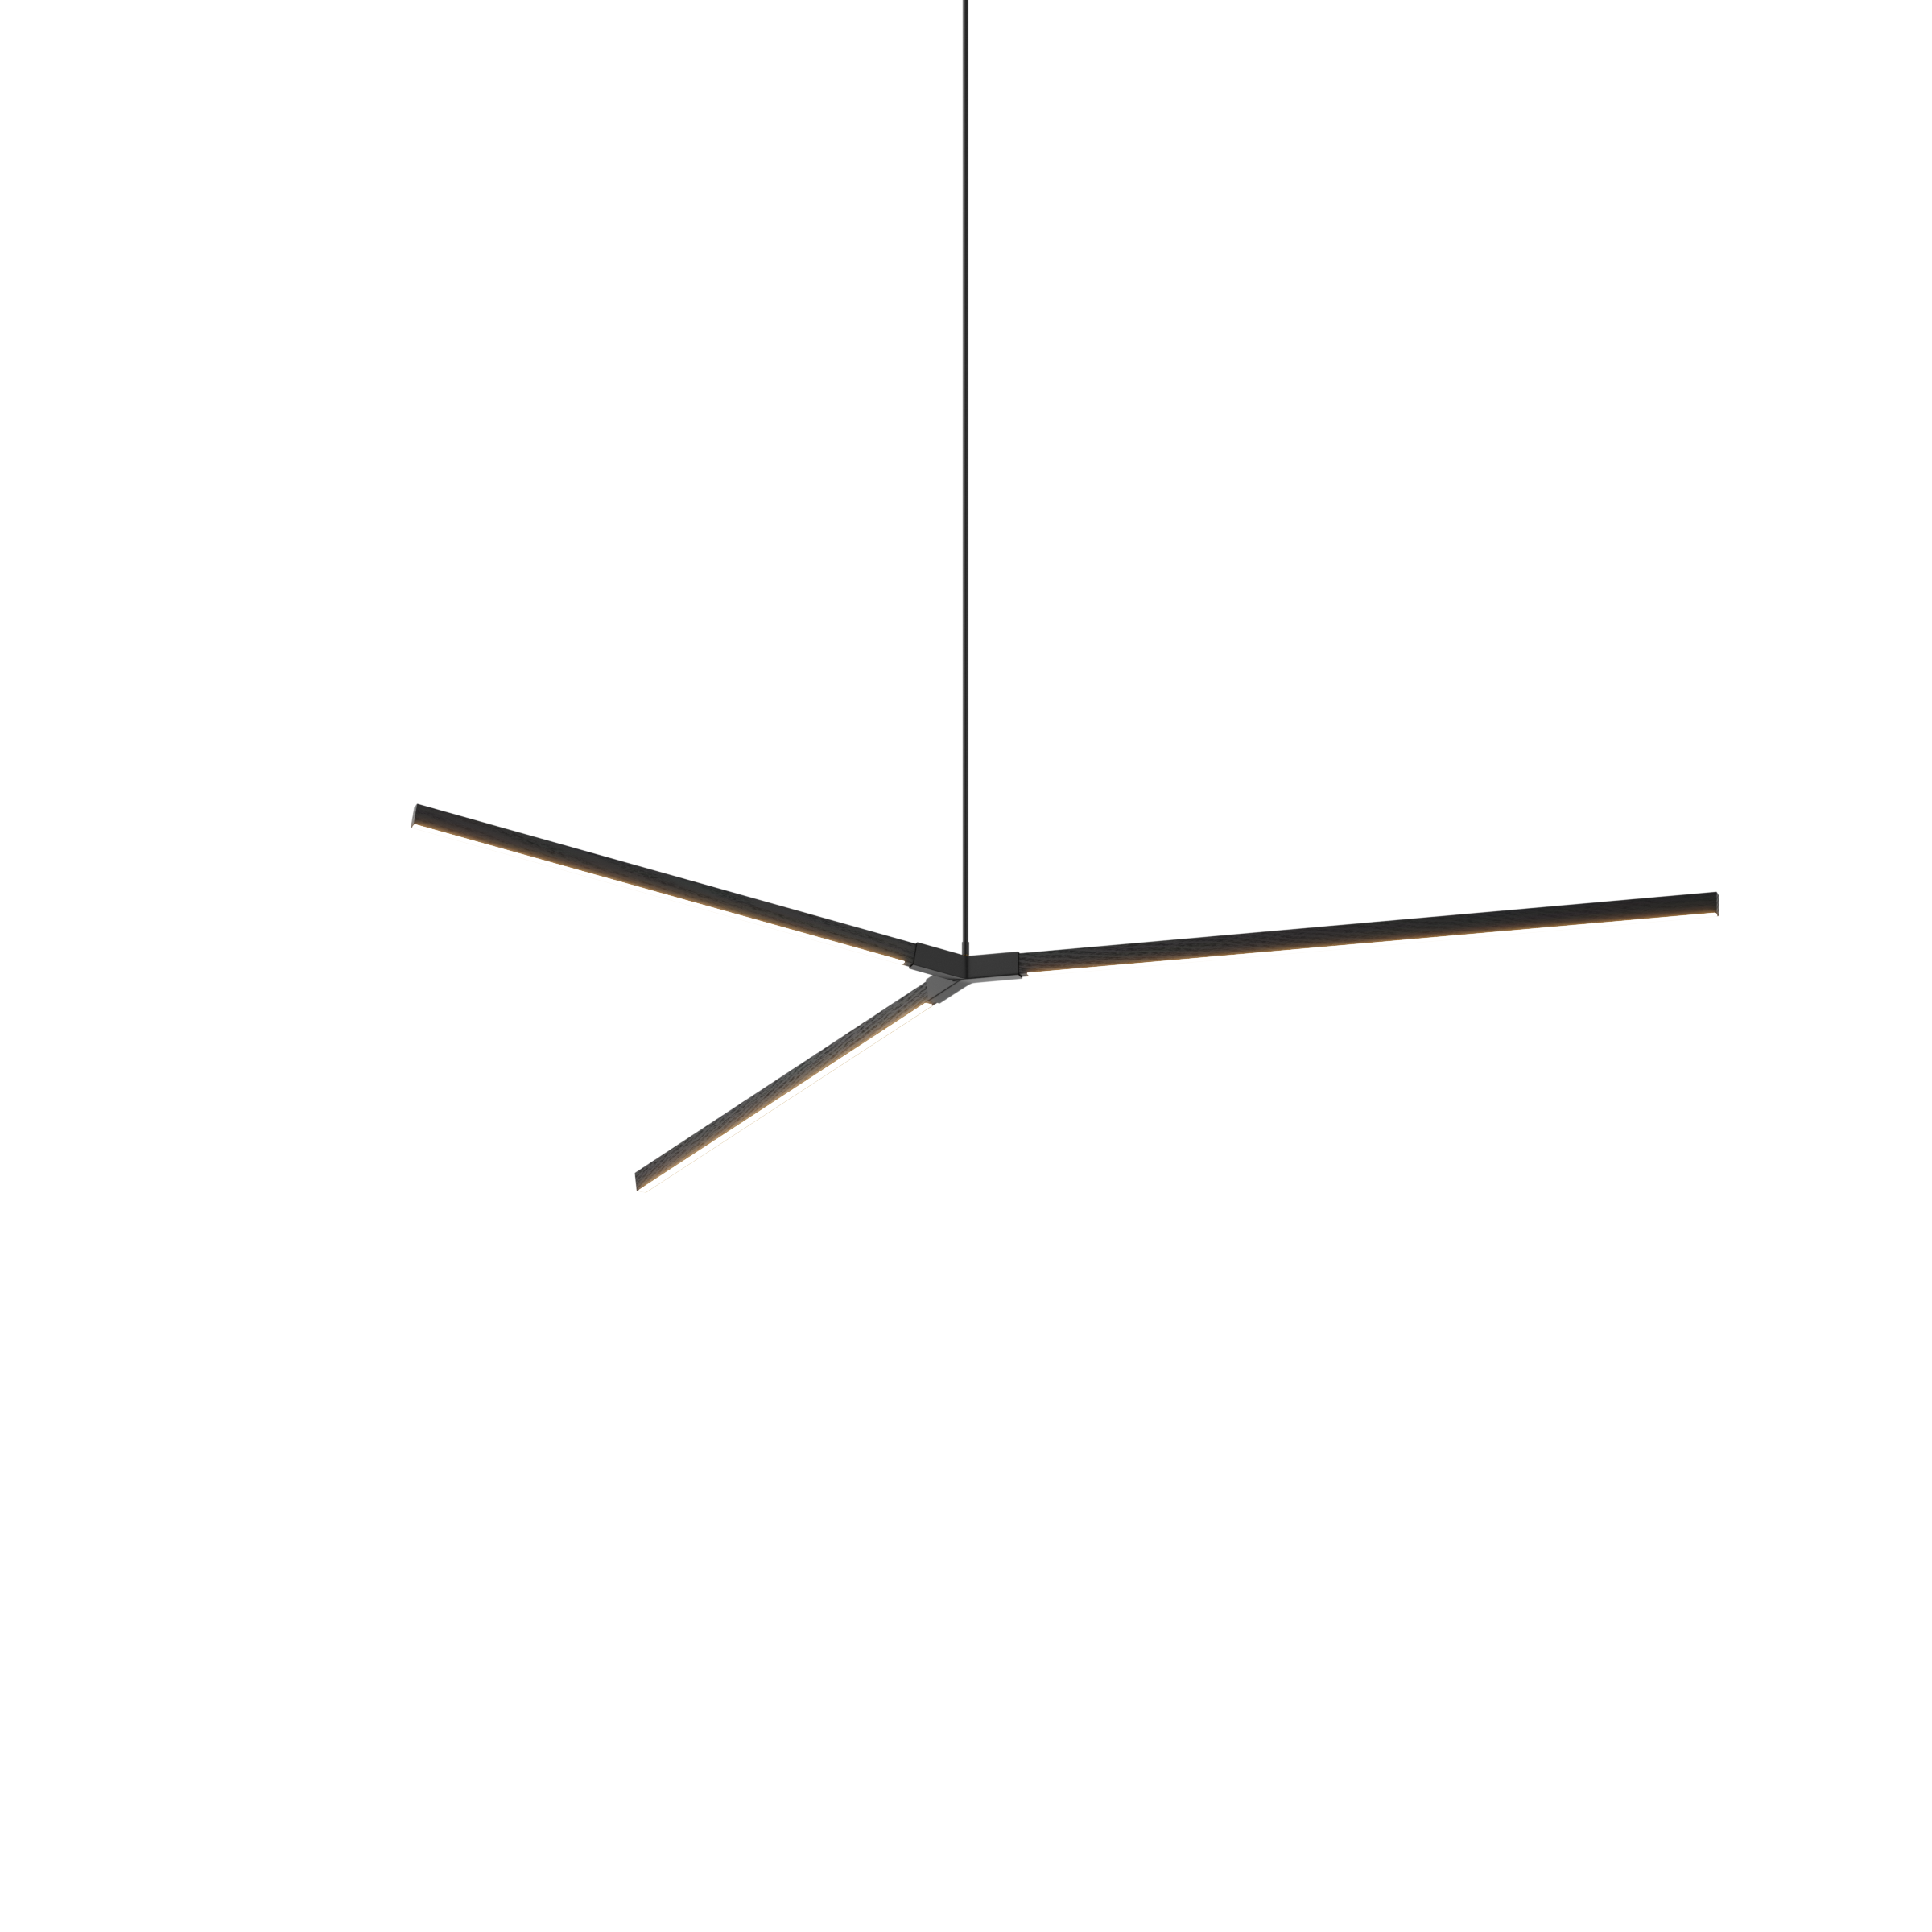 Image of a Stickbulb Bough lighting fixture. The modern fixture consists of sleek wooden beams with multiple integrated LED bulbs.